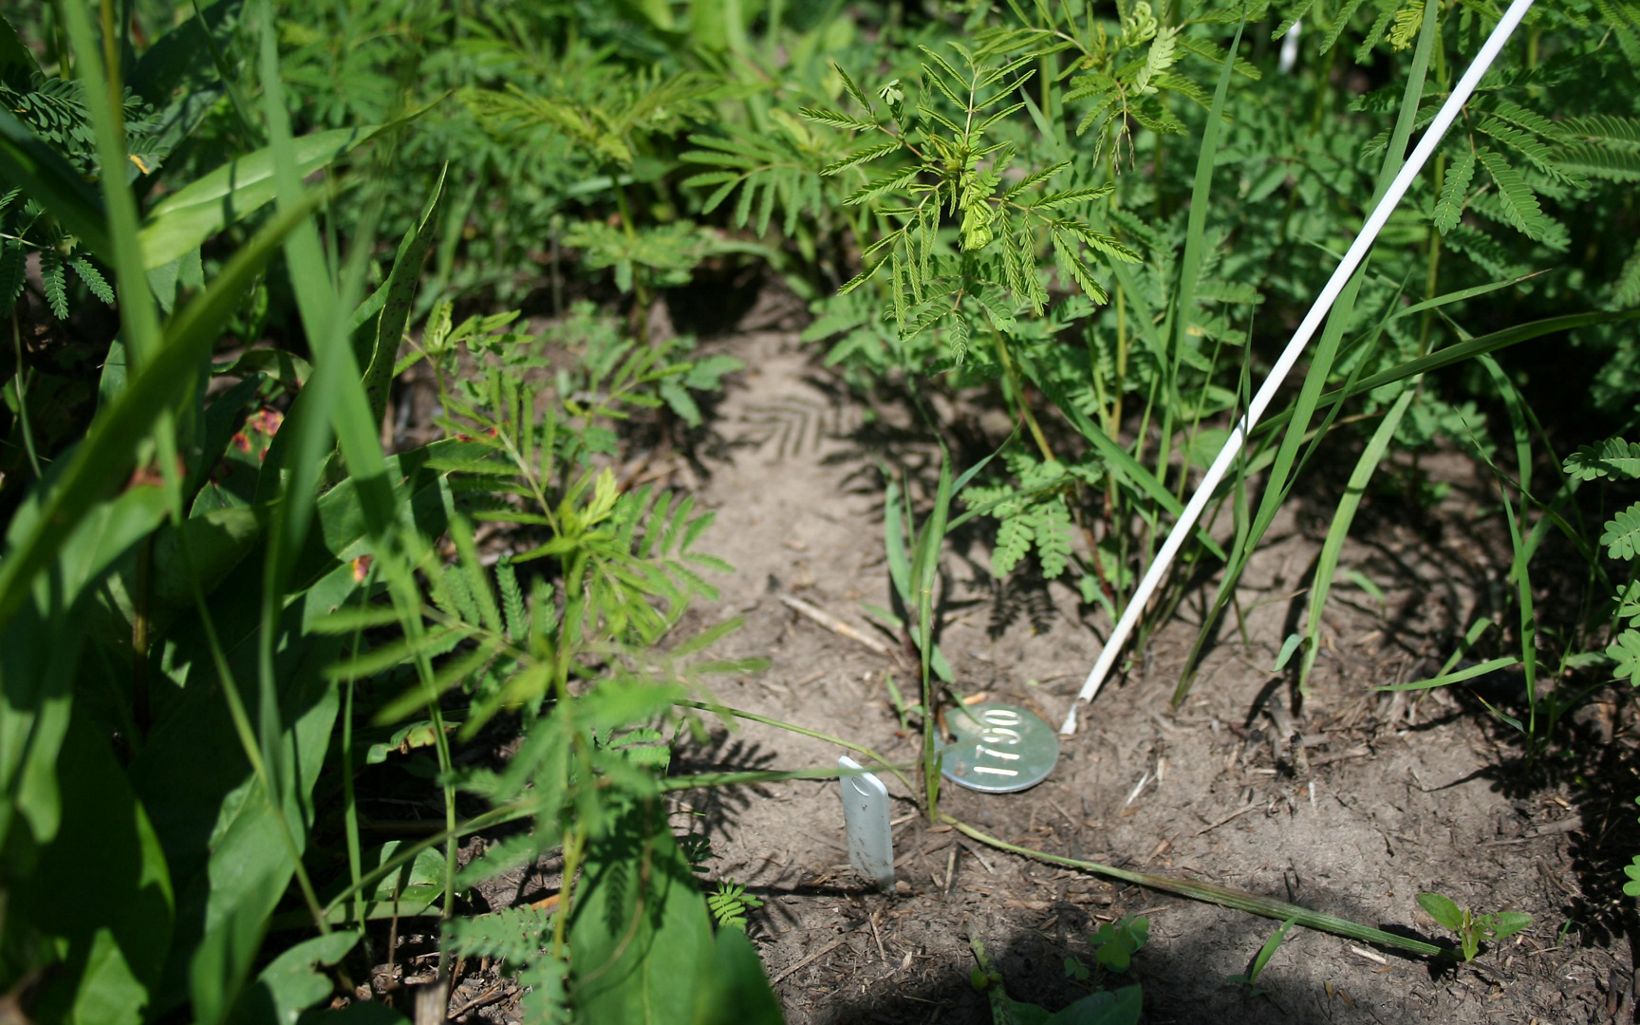 
                
                  RESEARCH Metal tags and plastic stakes mark individual plants and patches of soil being monitored by scientists from the Kansas Biological Survey.
                  © Laura Rose Clawson/TNC
                
              